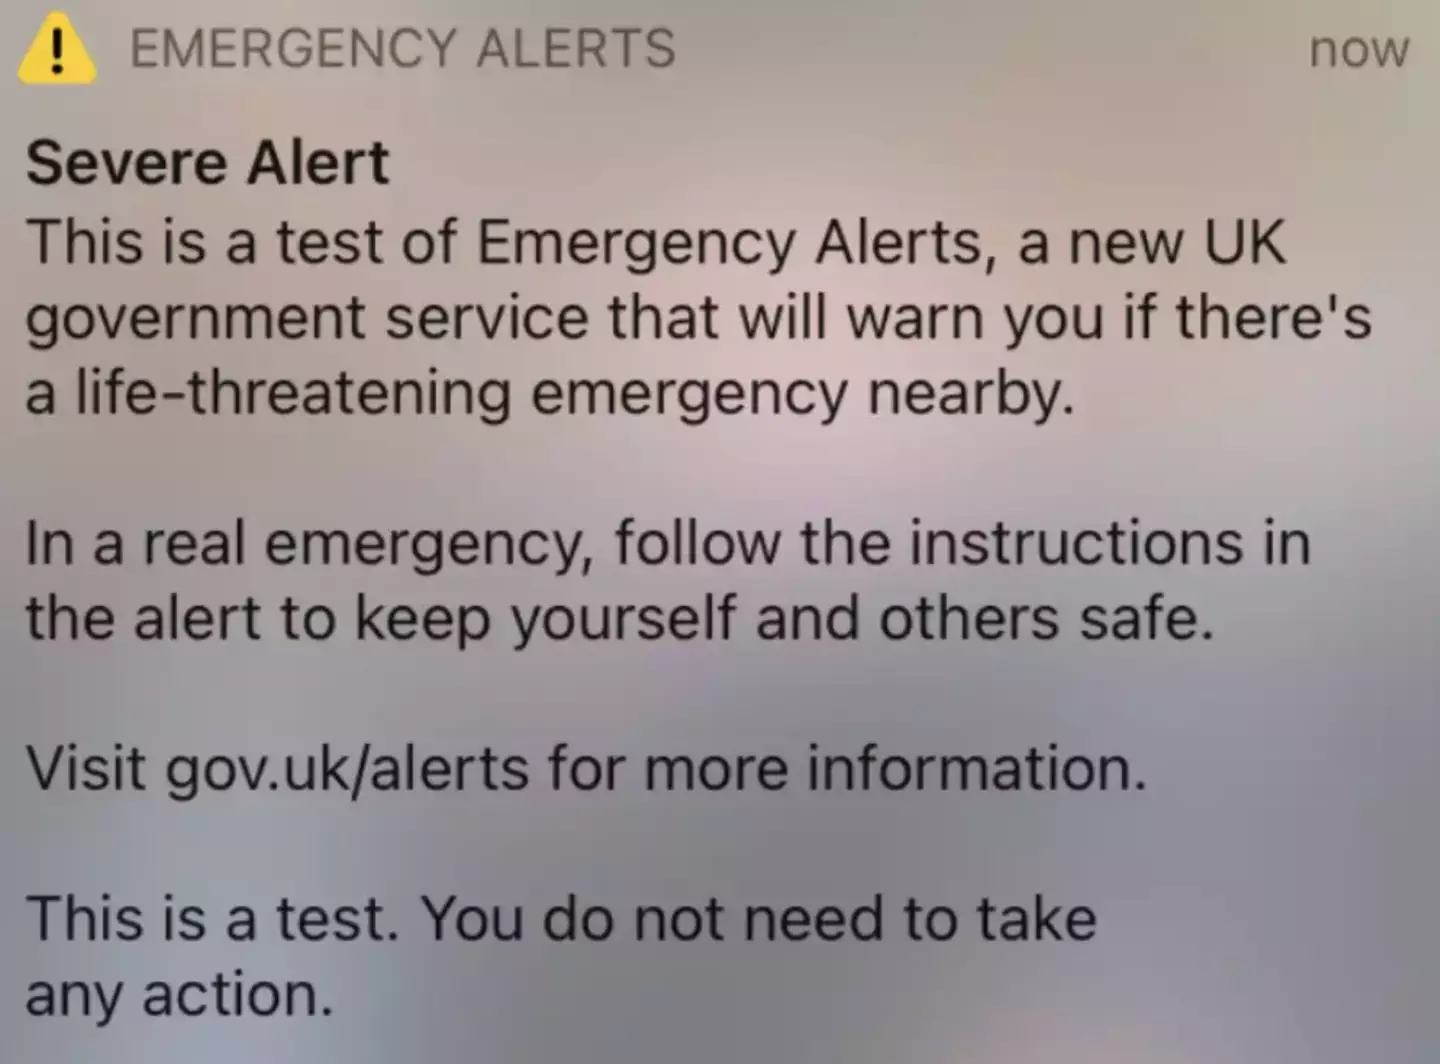 The alert was sent out to UK phones on Sunday, but not all Brits received it.